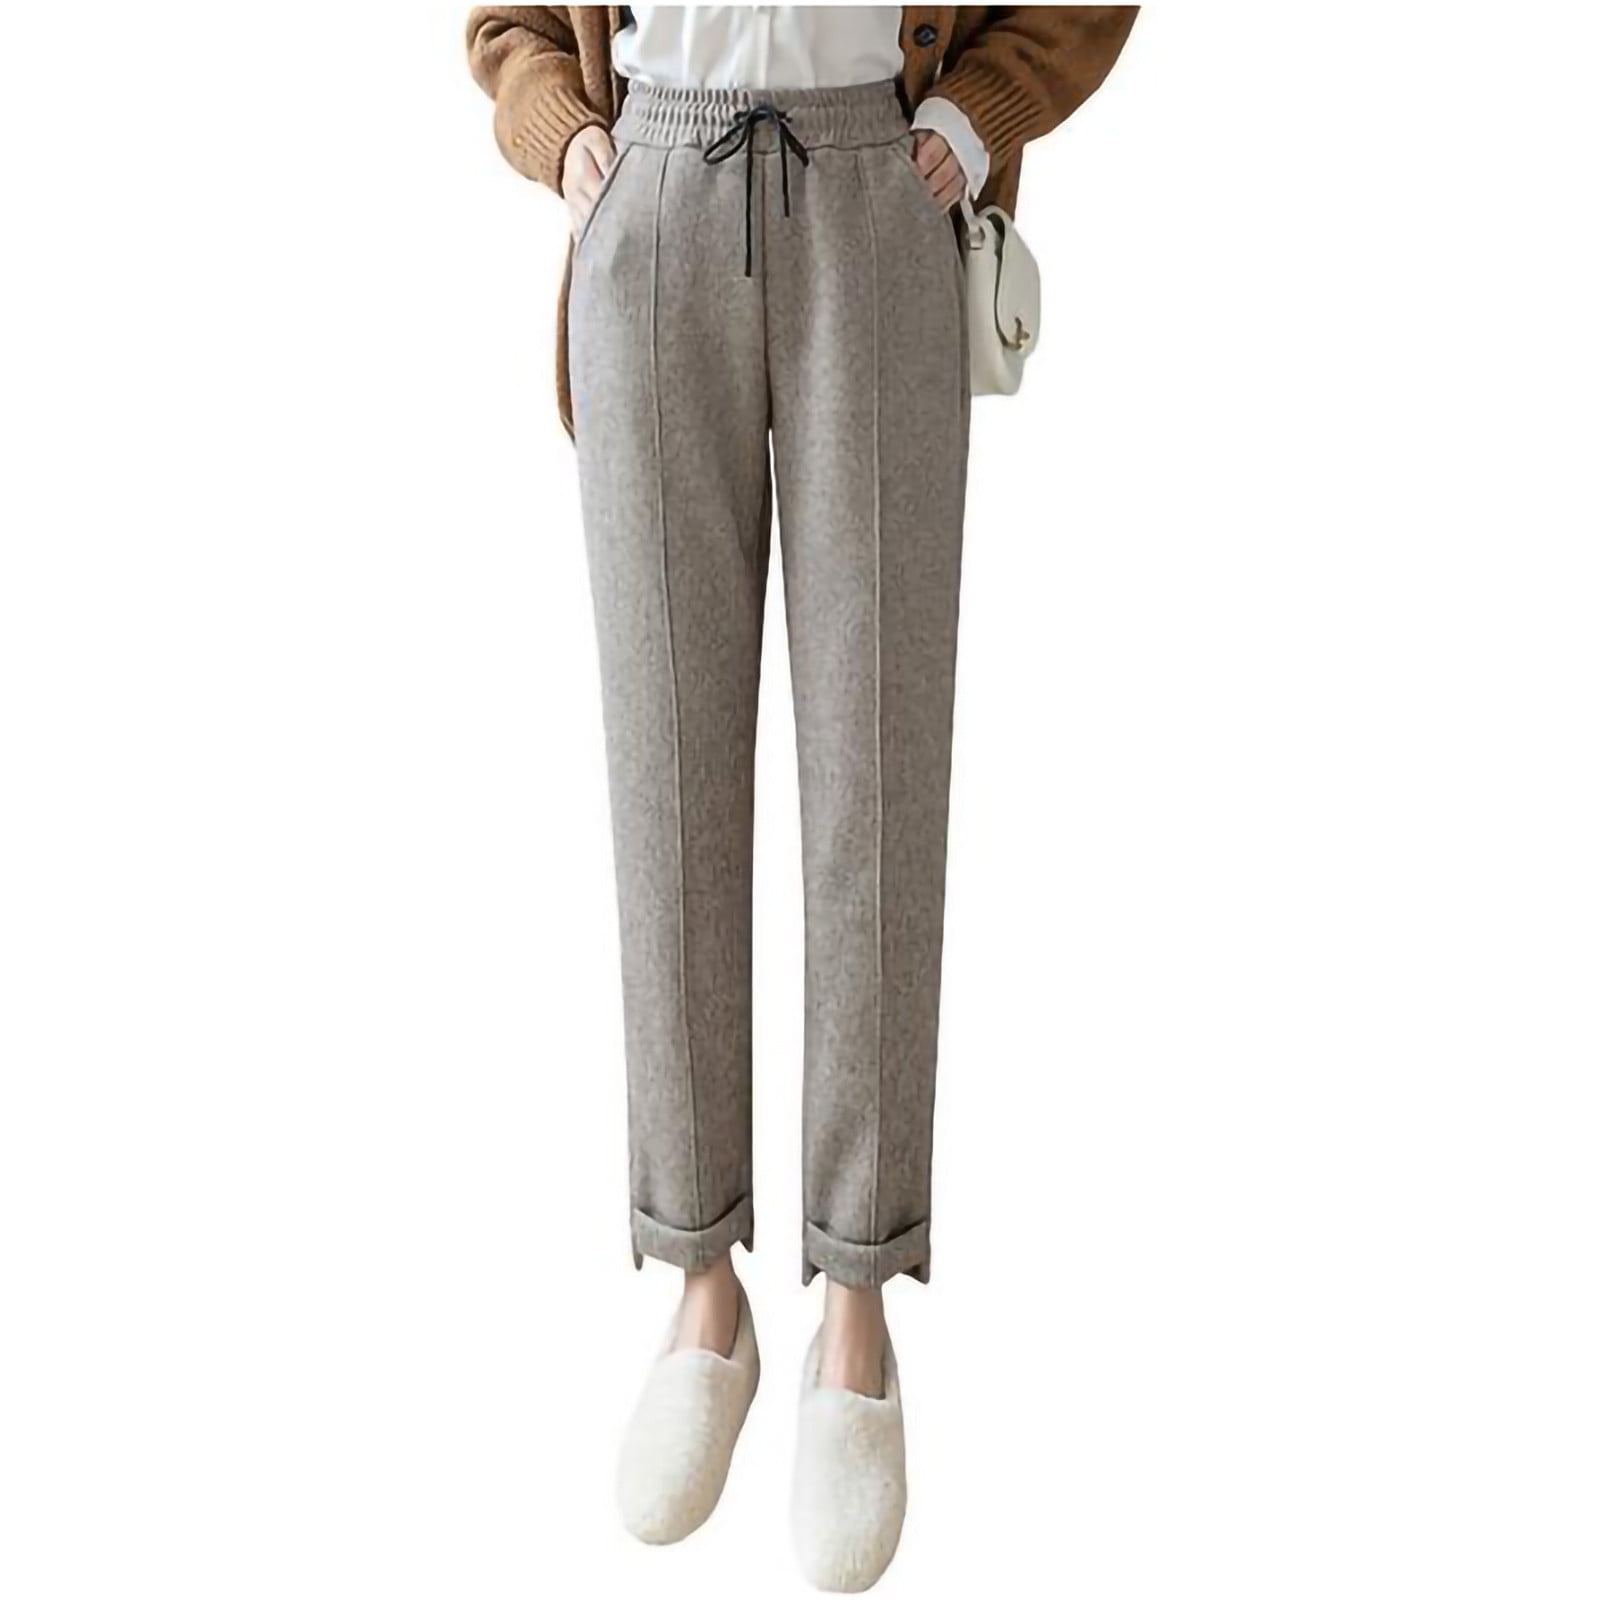 nsendm Female Pants Adult Womens Pants Casual Work Winter Women Pants Print  with Pockets Long Loose Pants Casual High Ladies Warm up Pants(Grey, XXL) 